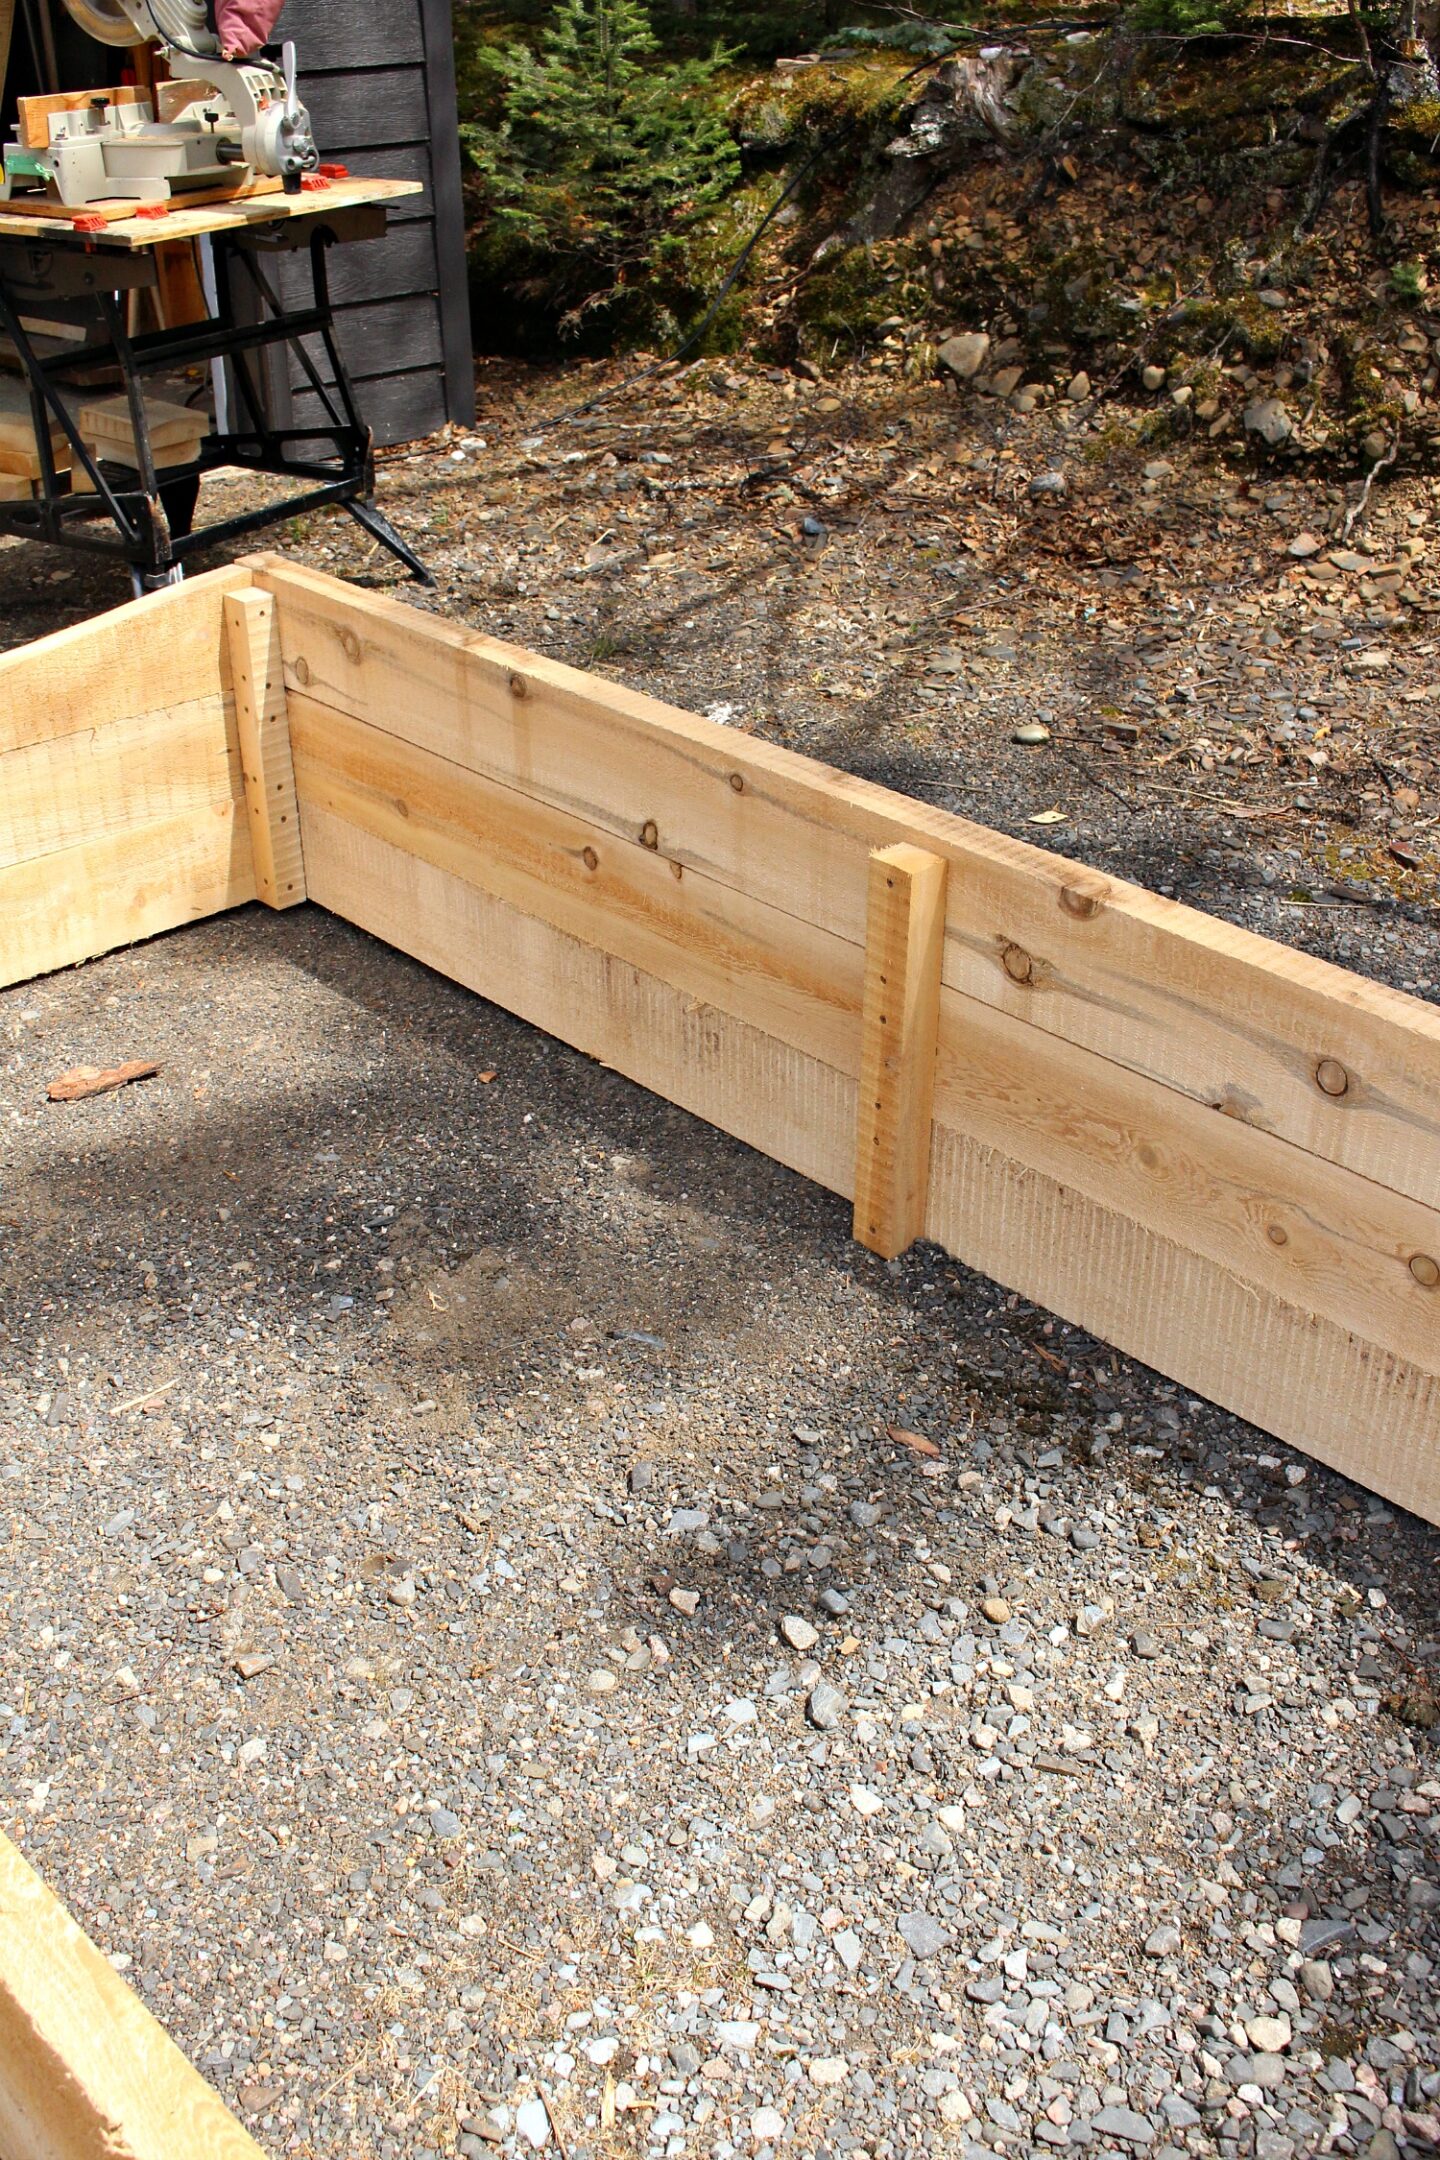 How to Make a Garden Bed